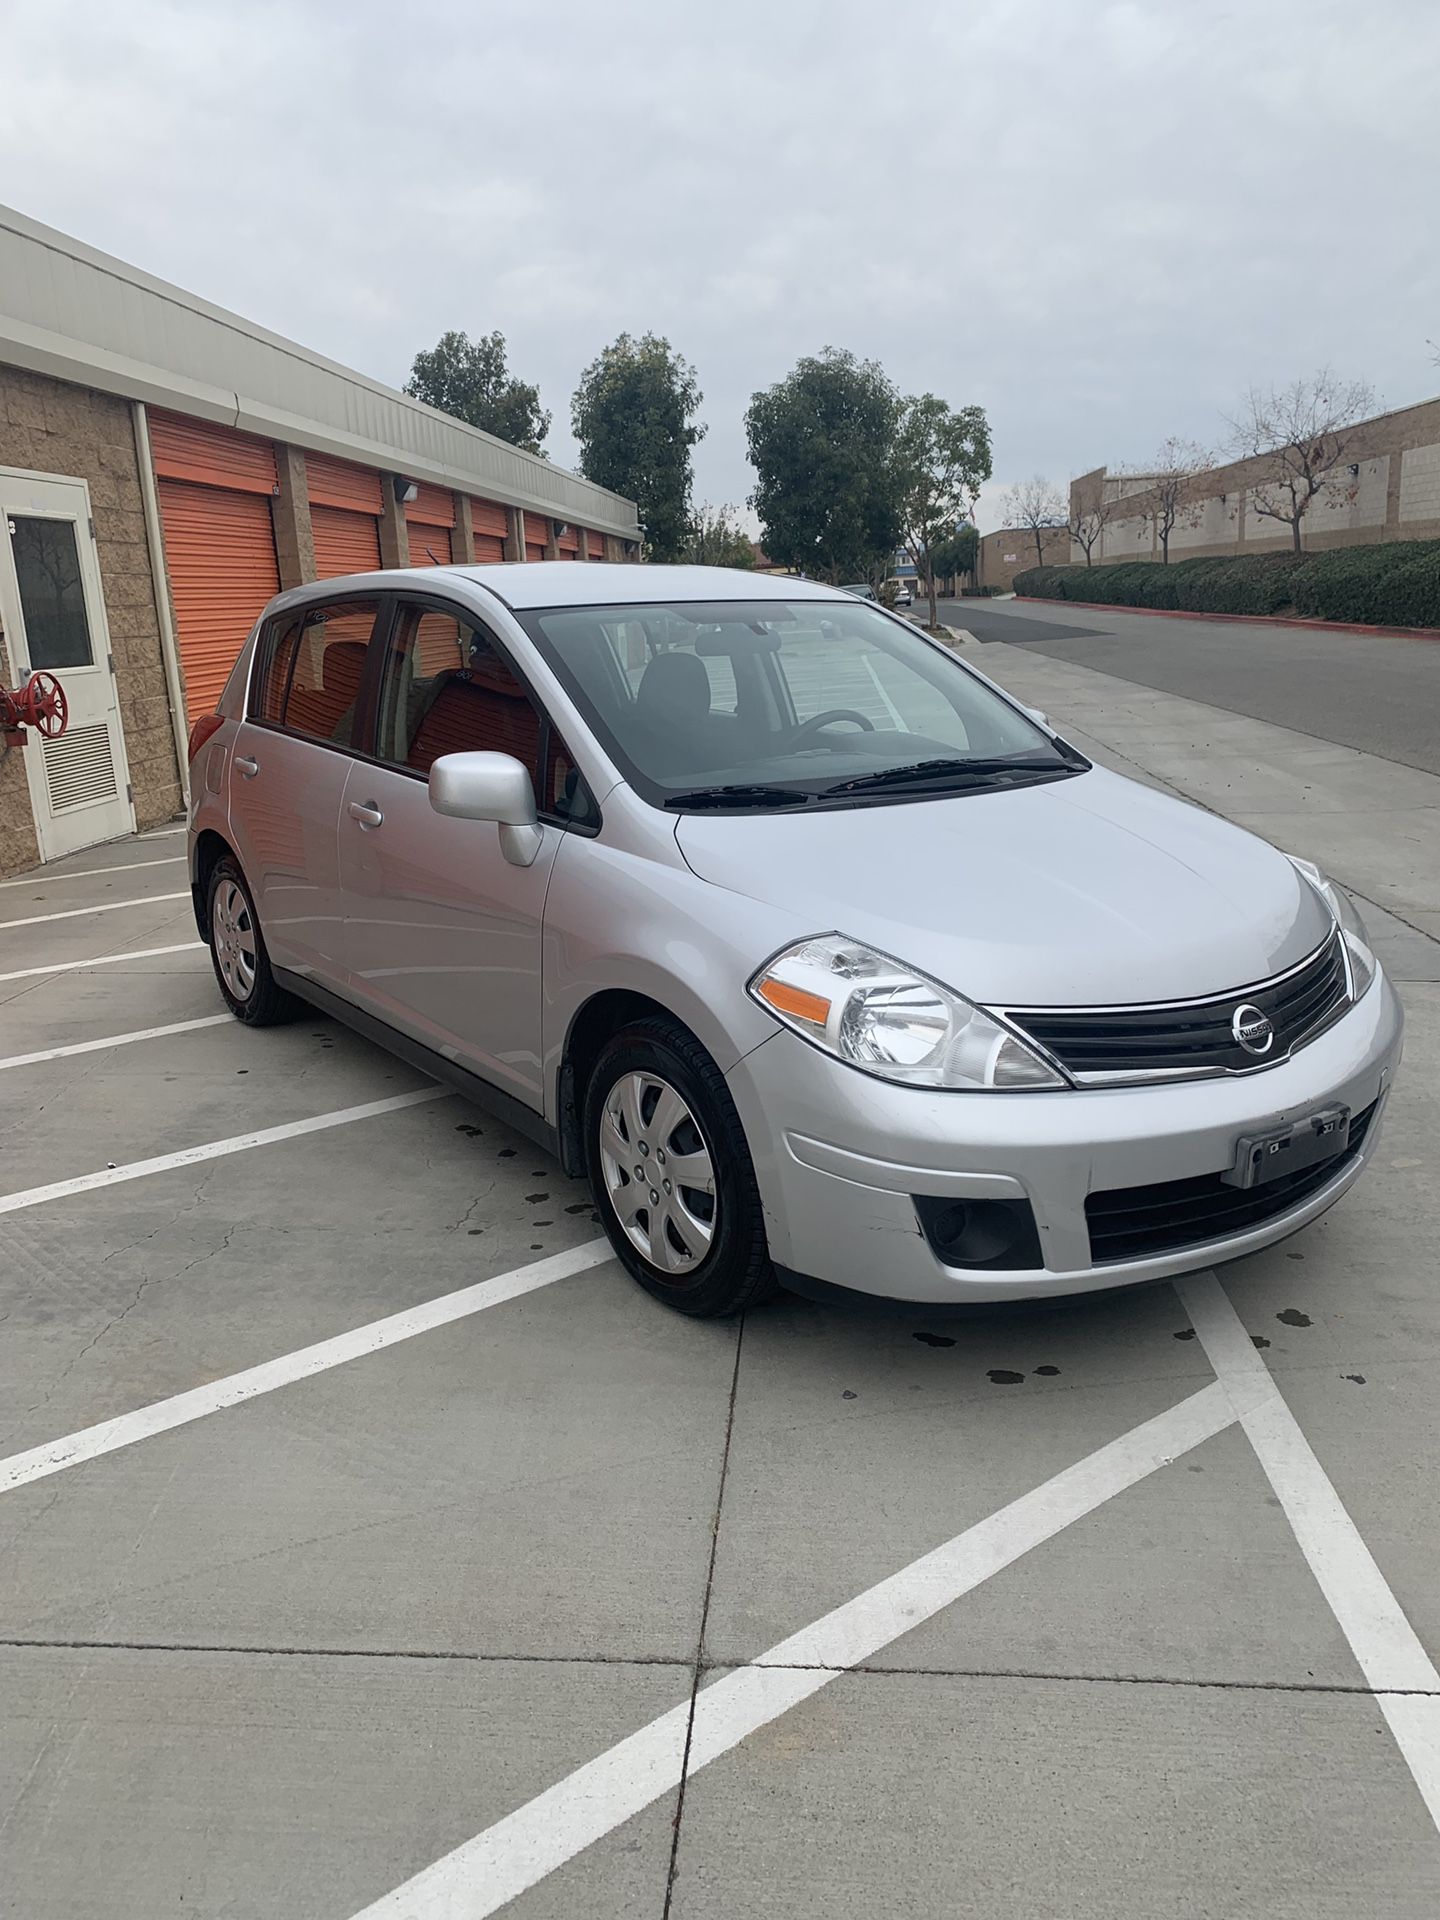 Nissan Versa 2012 only 93,000 miles